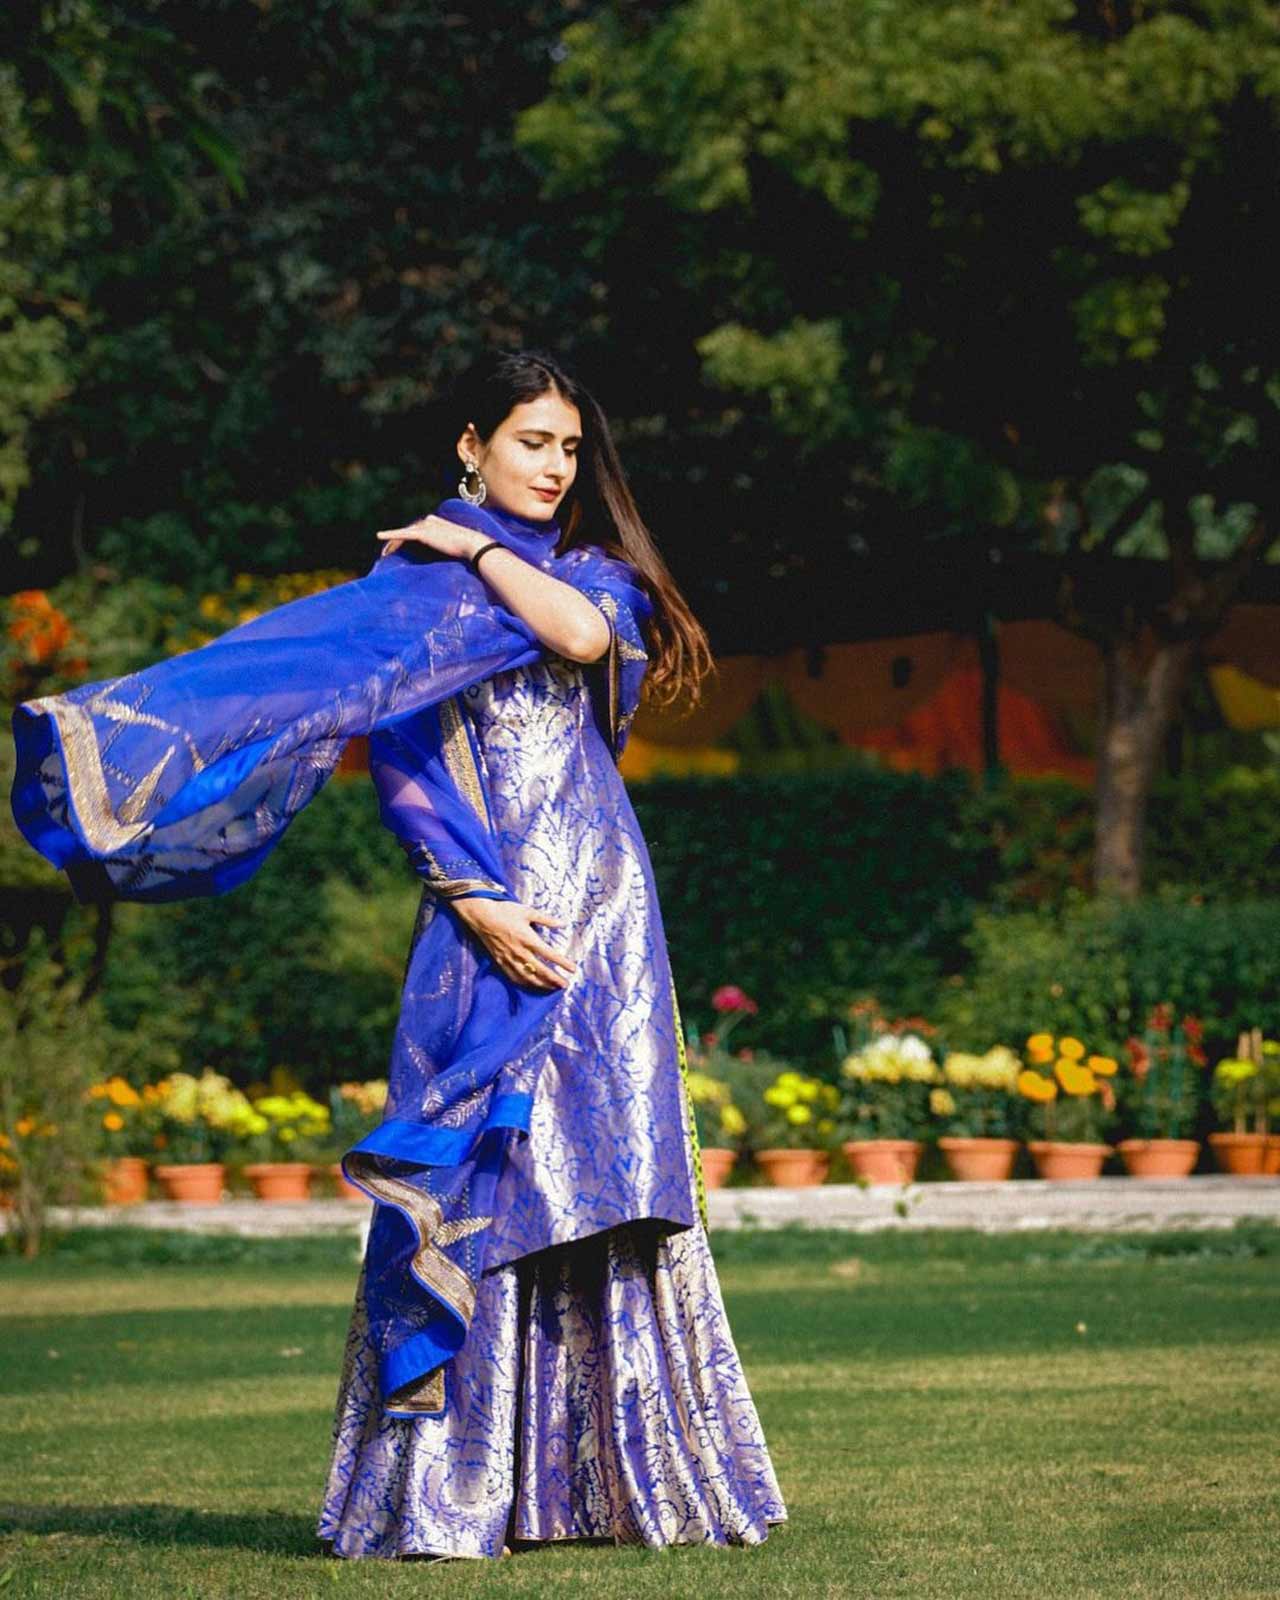 Girls looking forward to a comfortable yet vibrantly chic ethnic look can go for a traditional sharara suit paired with a matching dupatta. This blue ensemble from Fatima's wardrobe will make your heads turn at first sight. You can copy her ensemble and slay in this Indian outfit.